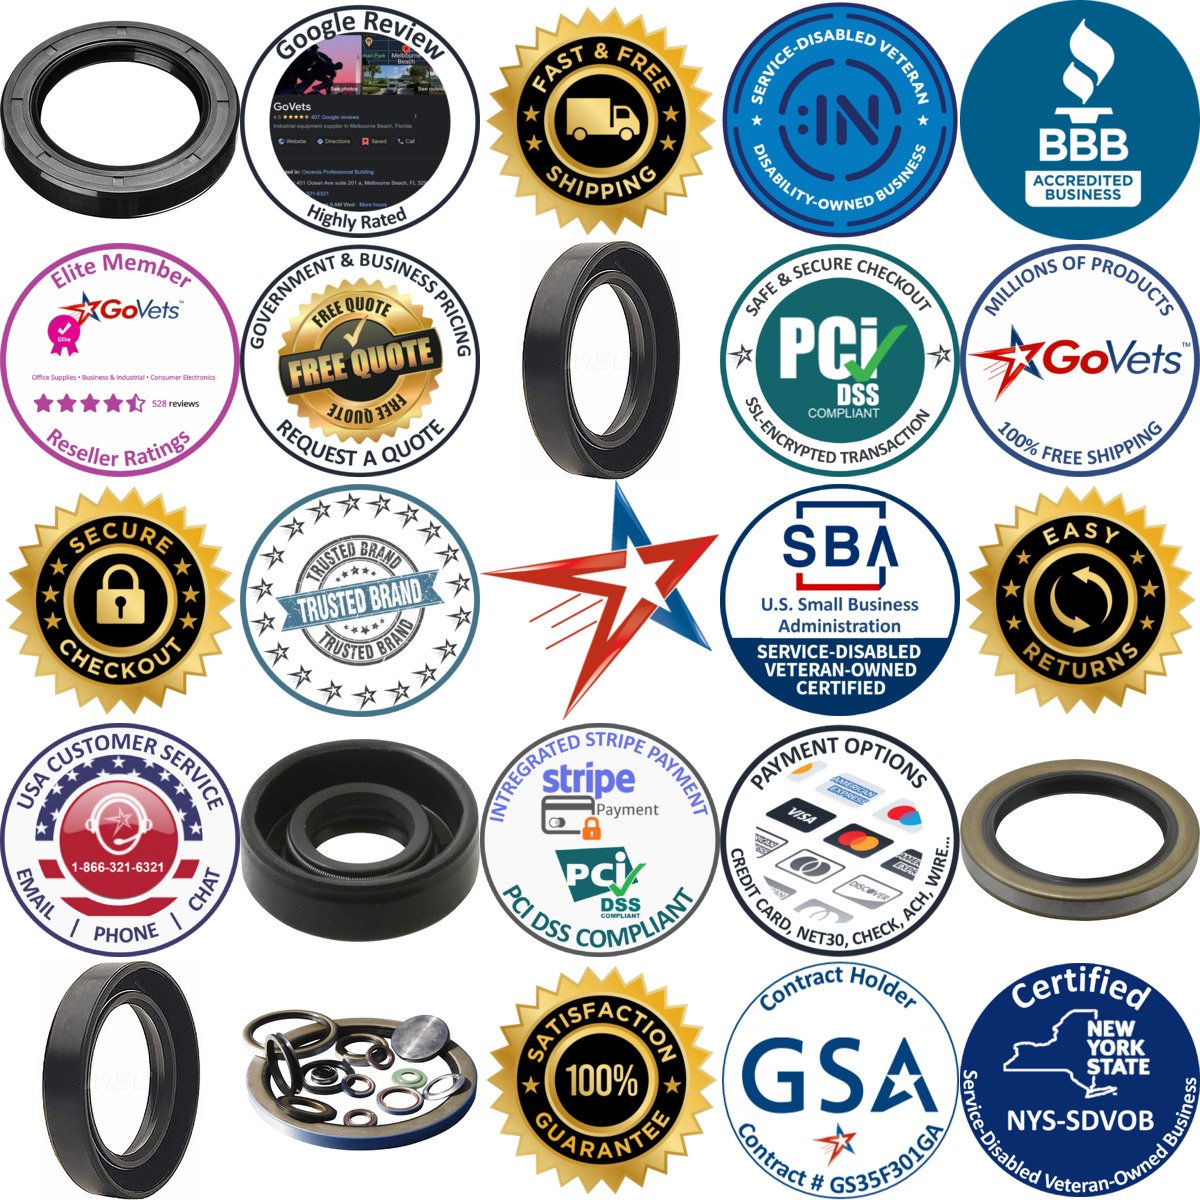 A selection of Automotive Fittings and Seals products on GoVets